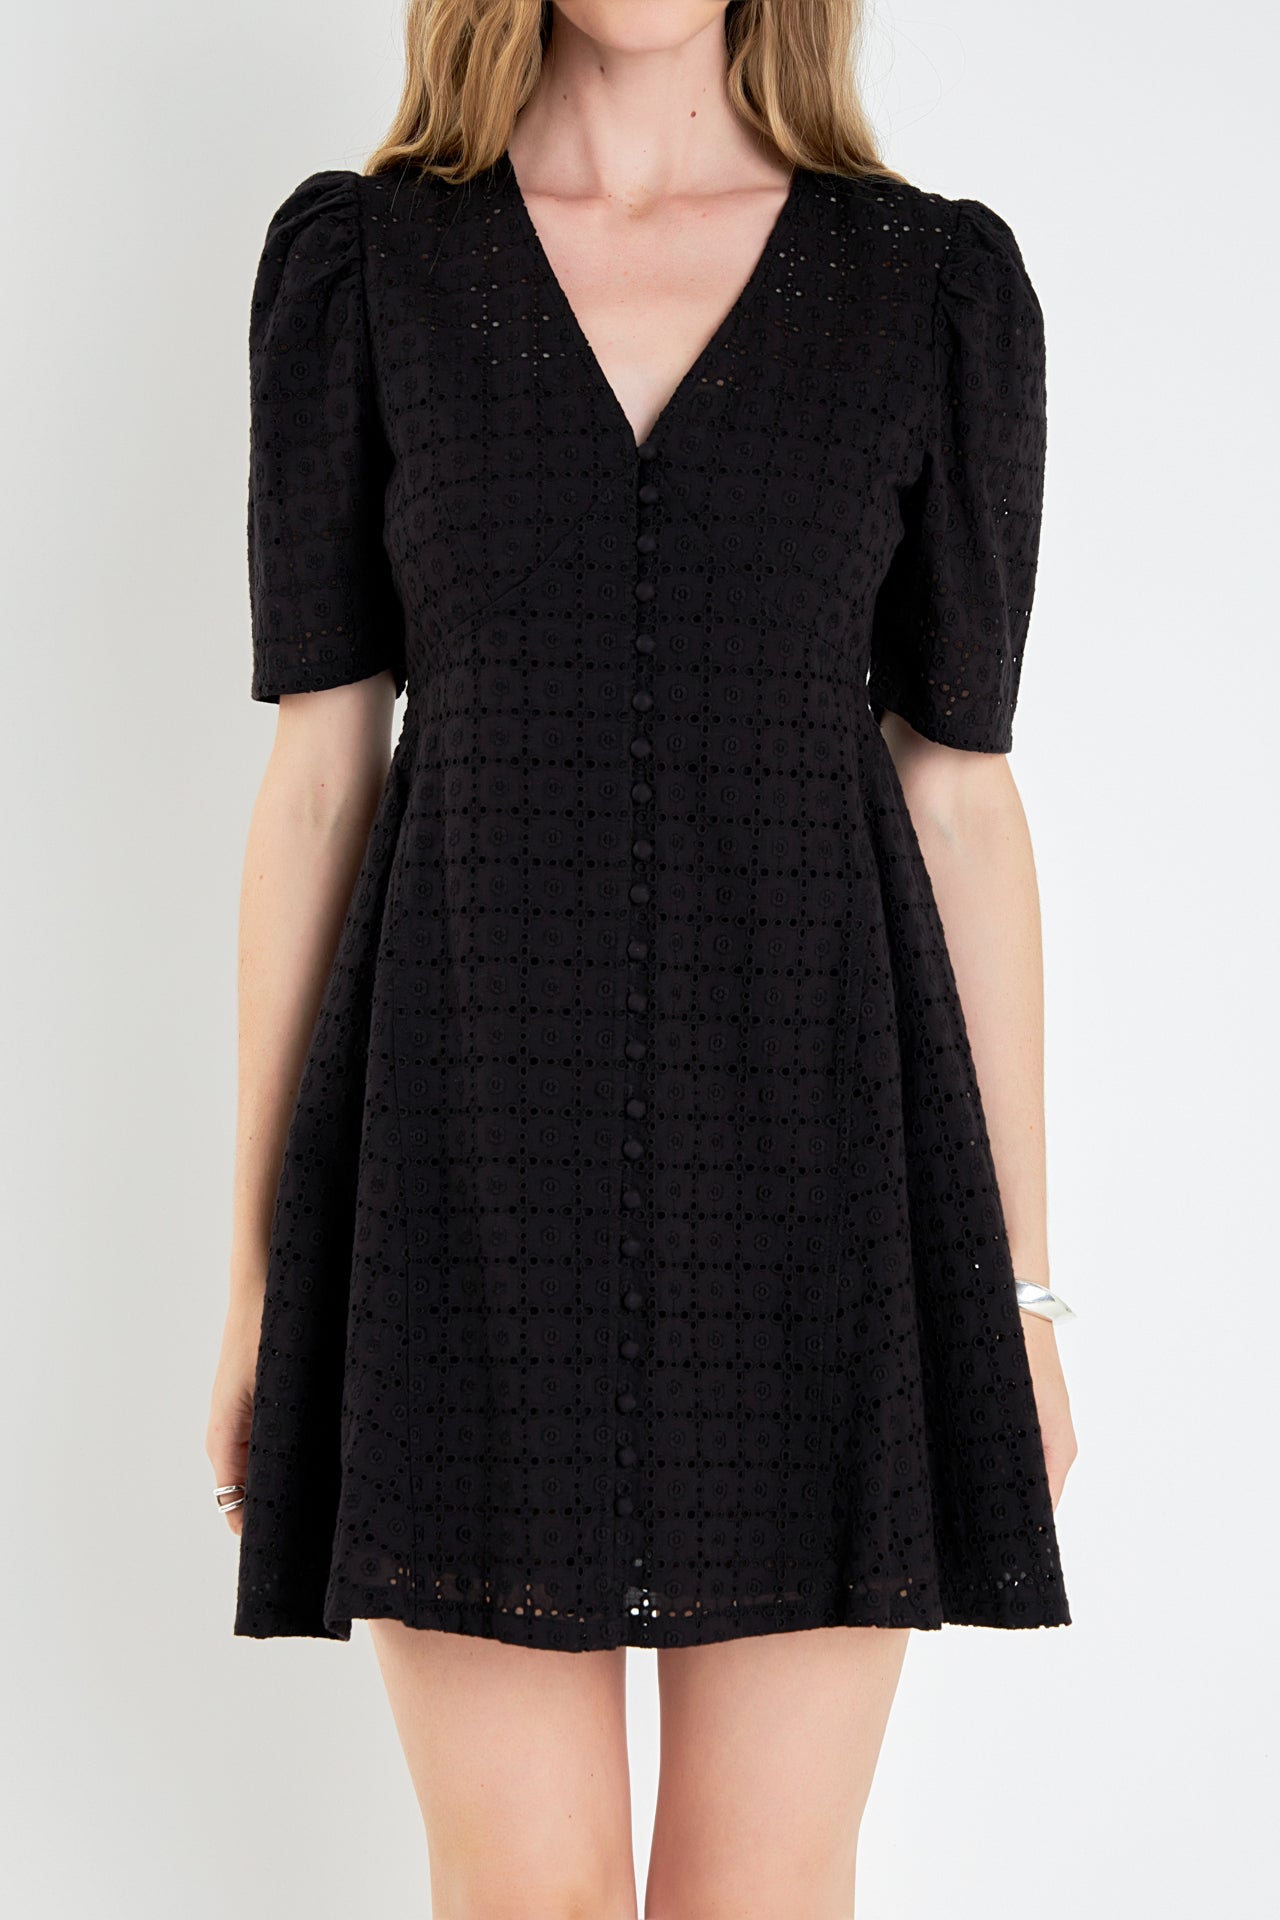 Broderie Lace Dress